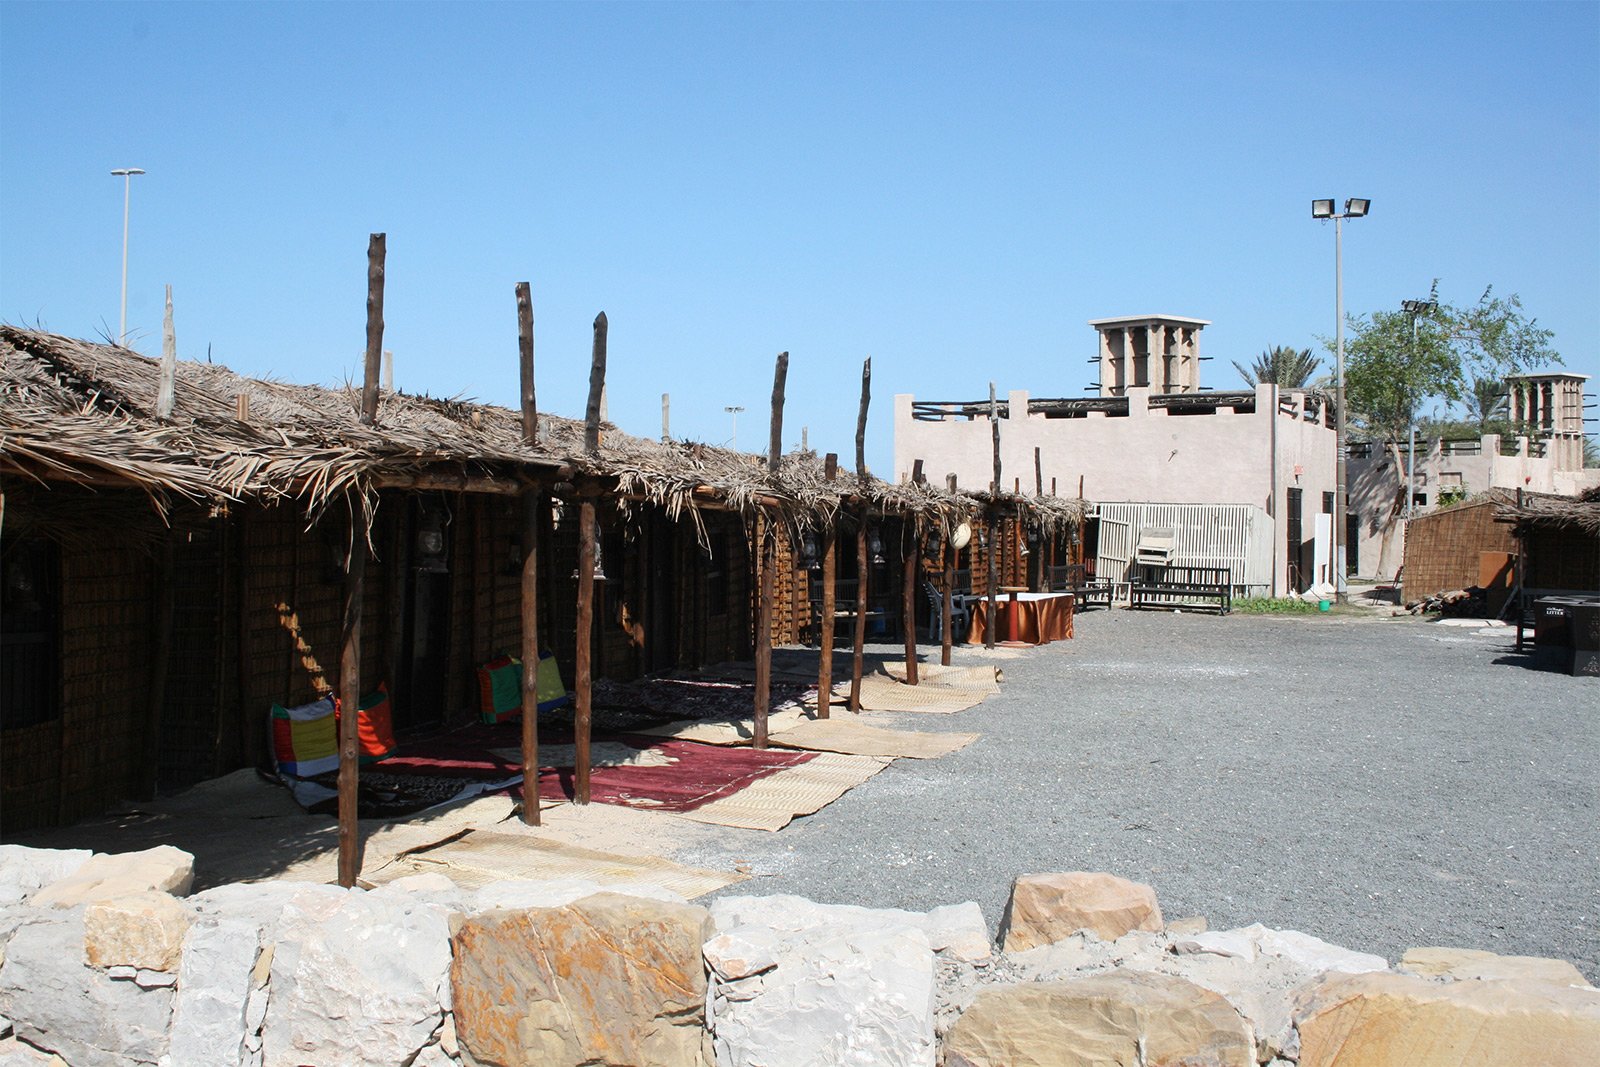 How to see the old Arab village in Dubai